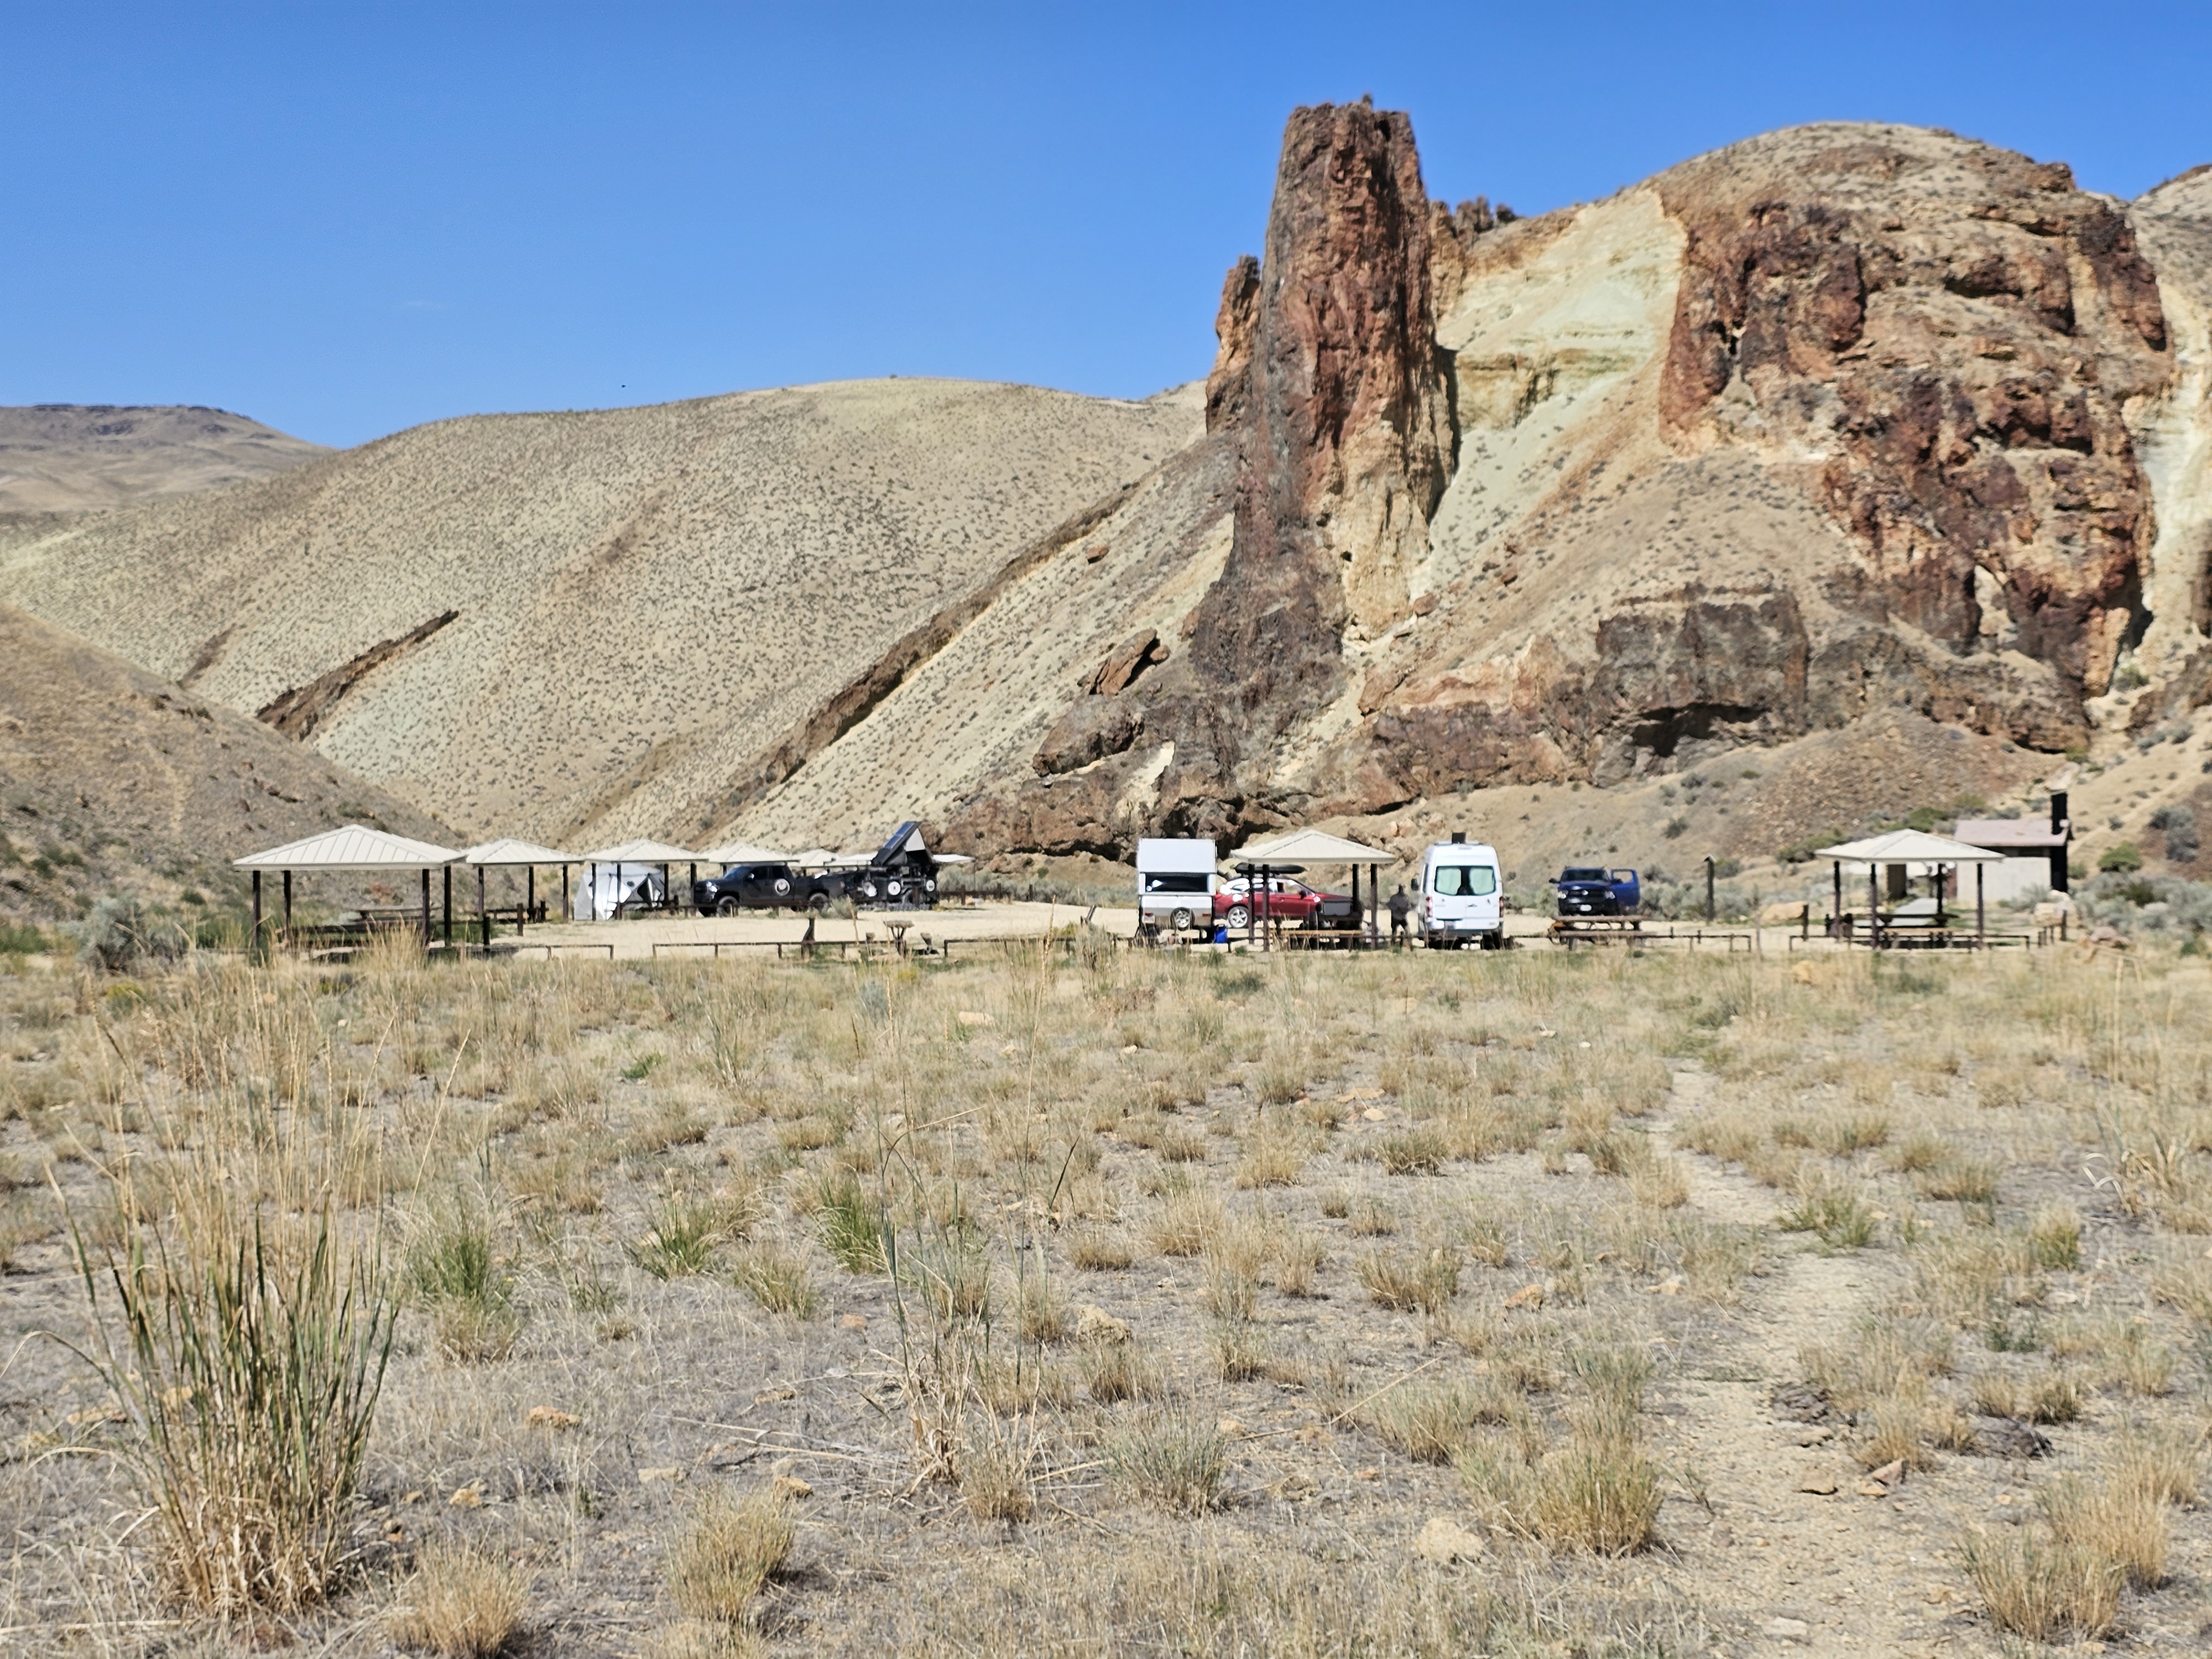 View of Slocum Creek Campground